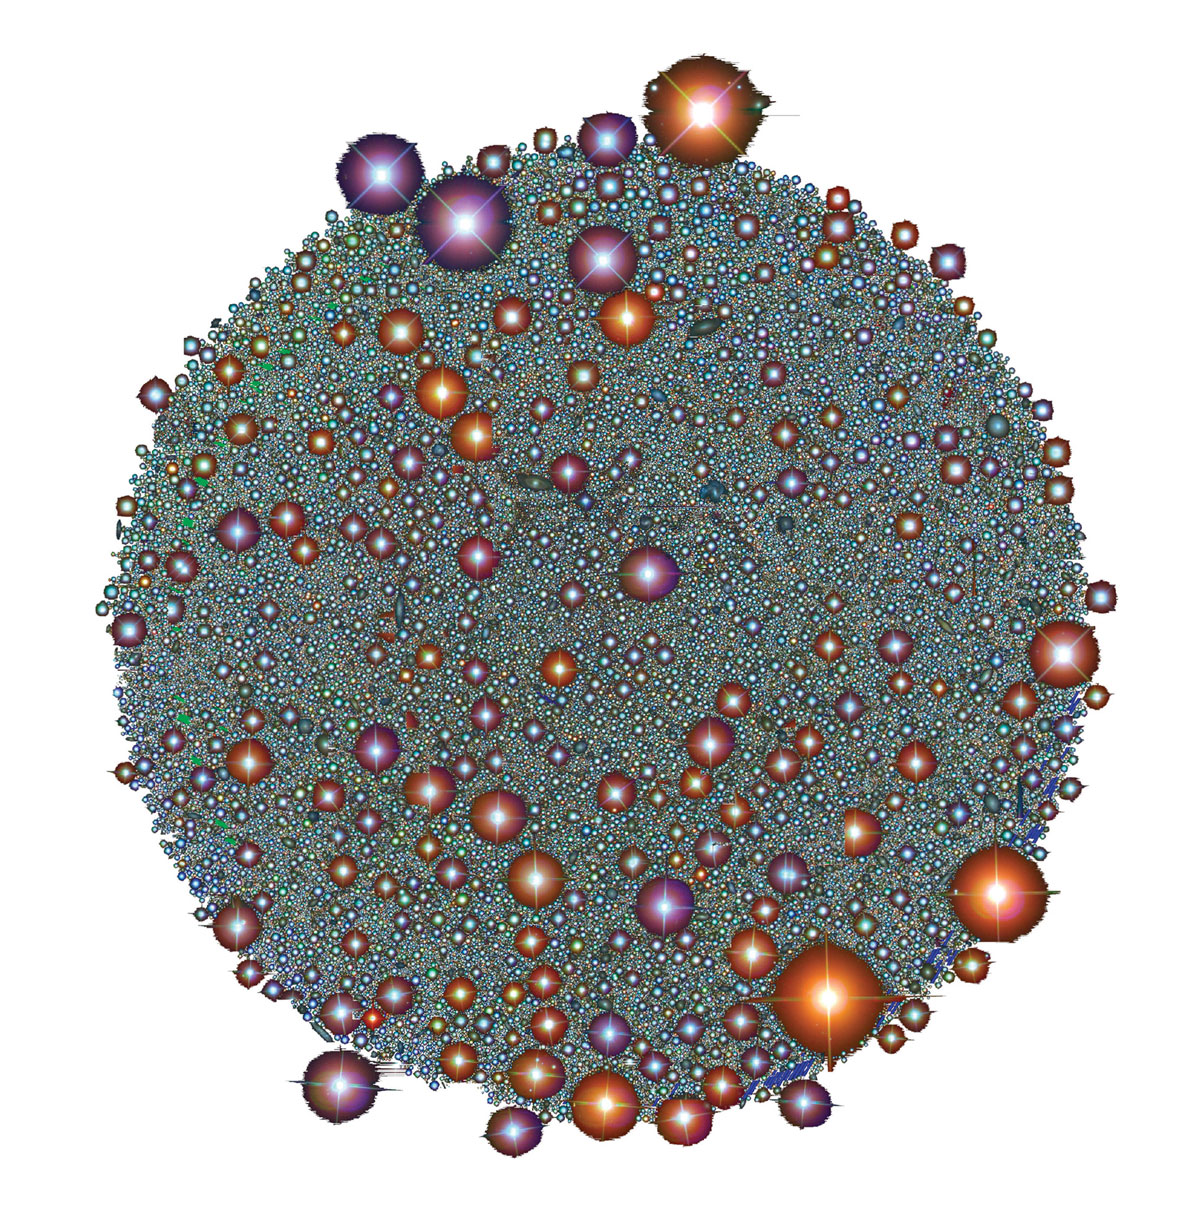 Universe data from 2004 compressed by Lee Boroson into one image, entitled CI 25 square degrees (24x24).